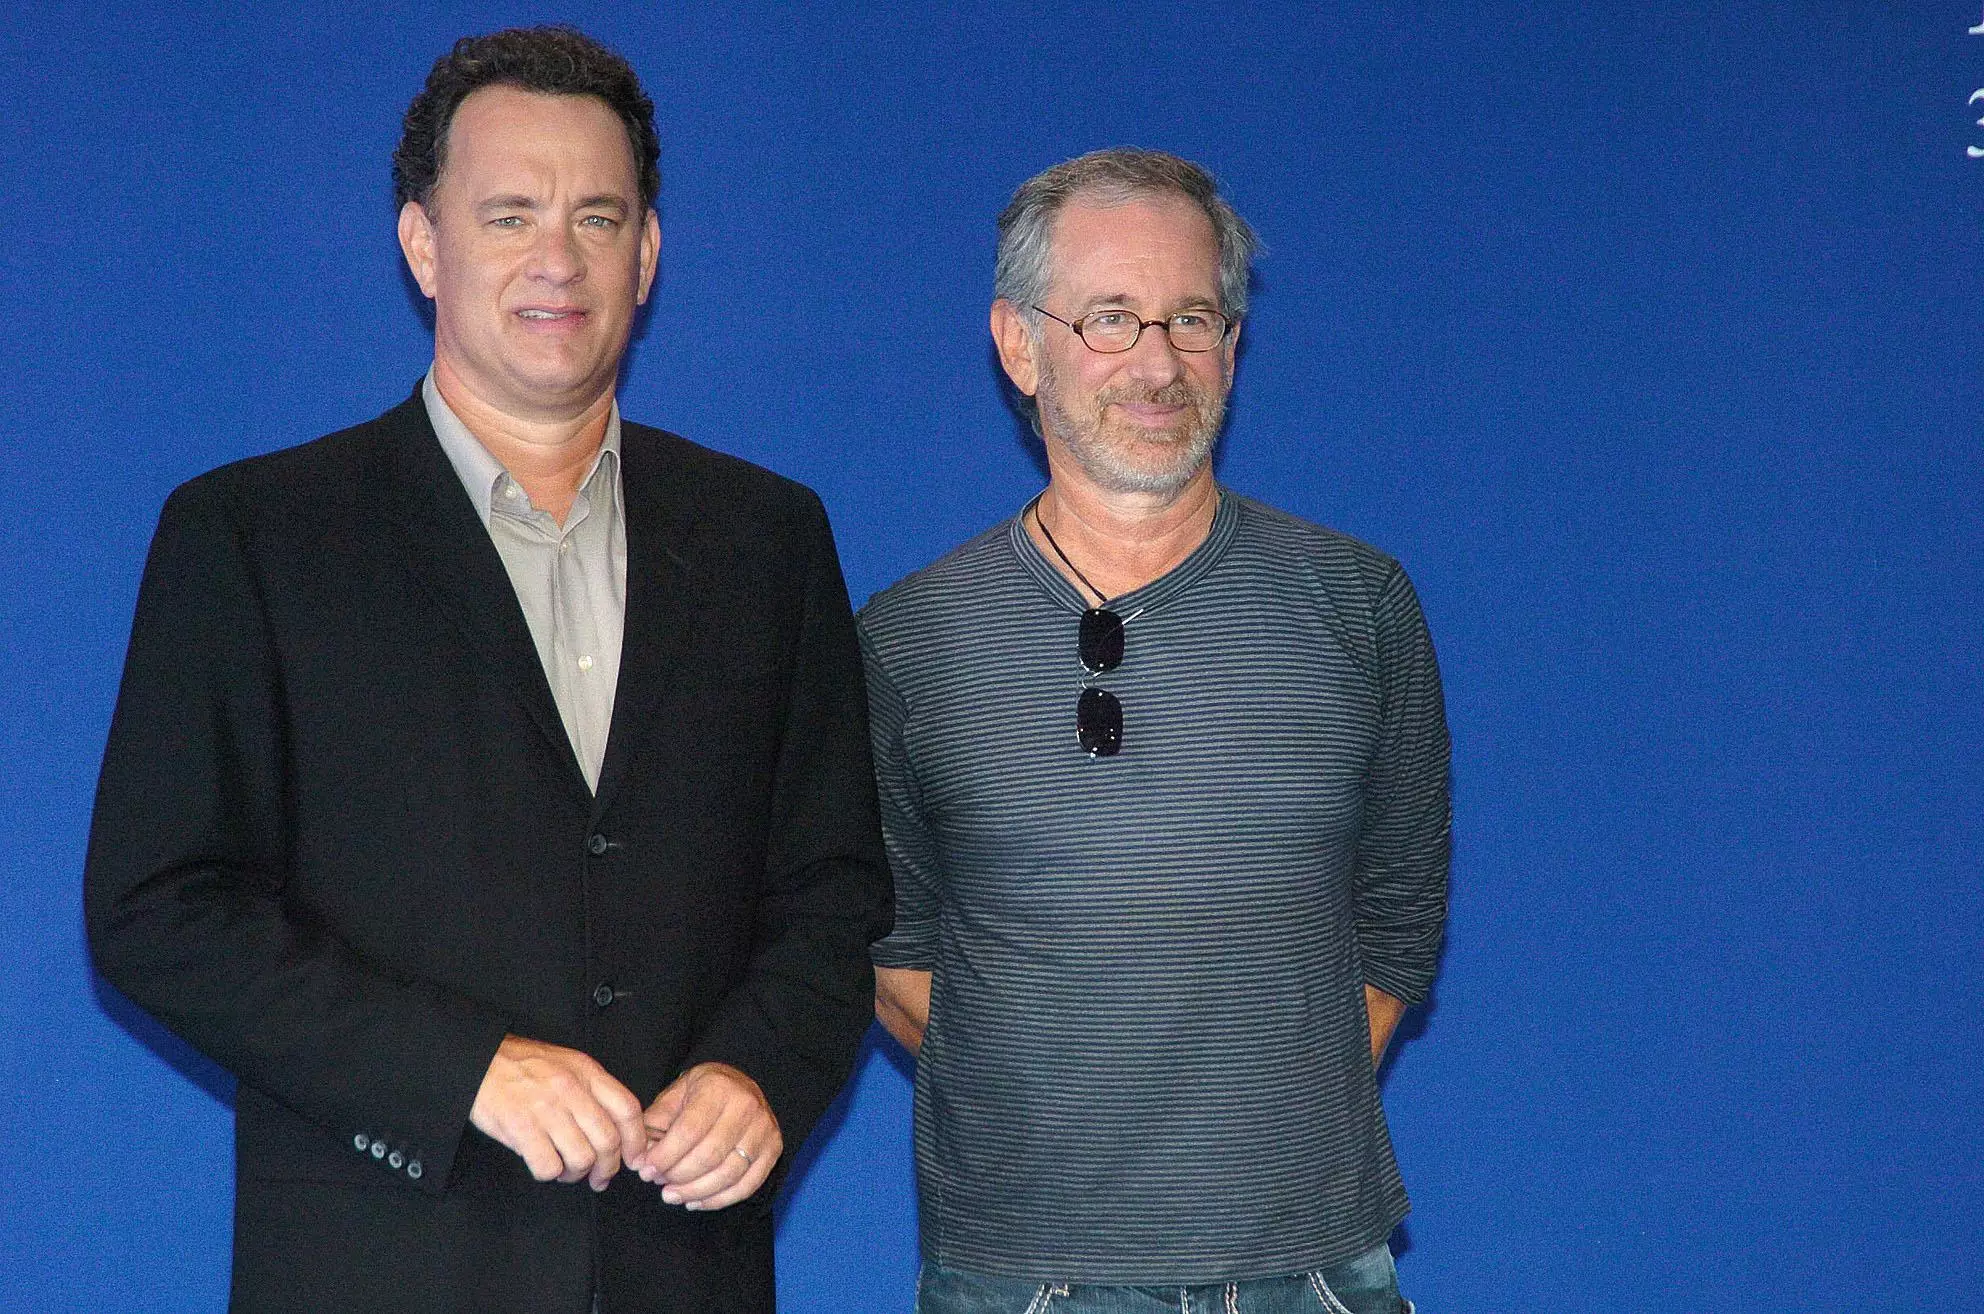 When Hanks and Spielberg collaborate you know you're in for a treat.